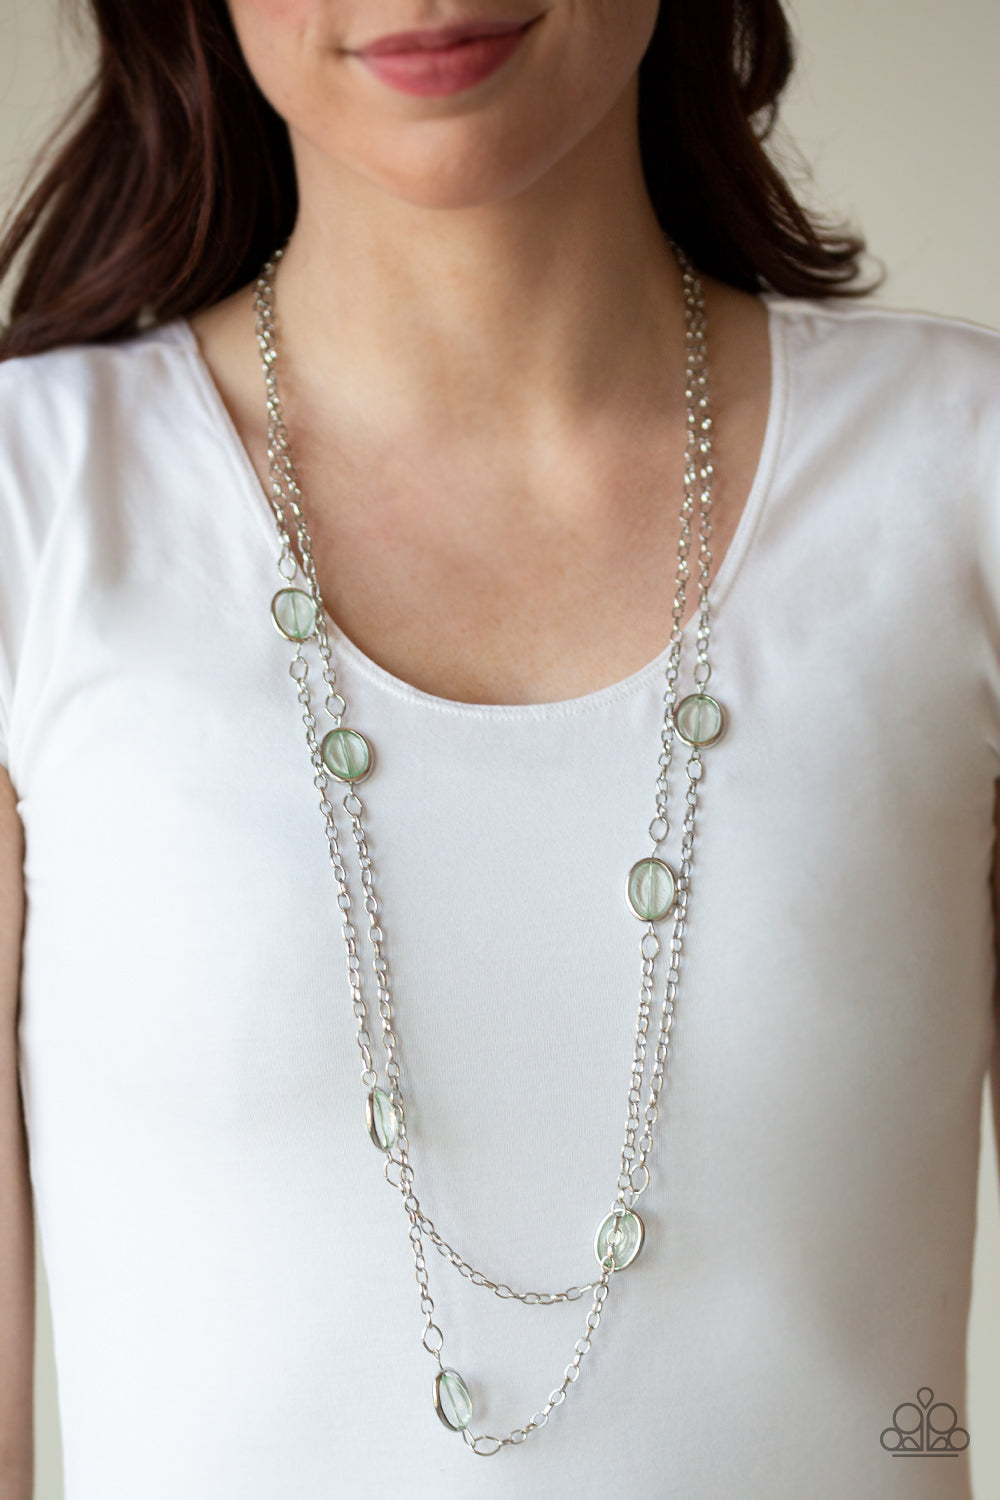 Paparazzi Back For More - Green - Beads - Silver Shimmery Chains - Necklace & Earrings - $5 Jewelry with Ashley Swint